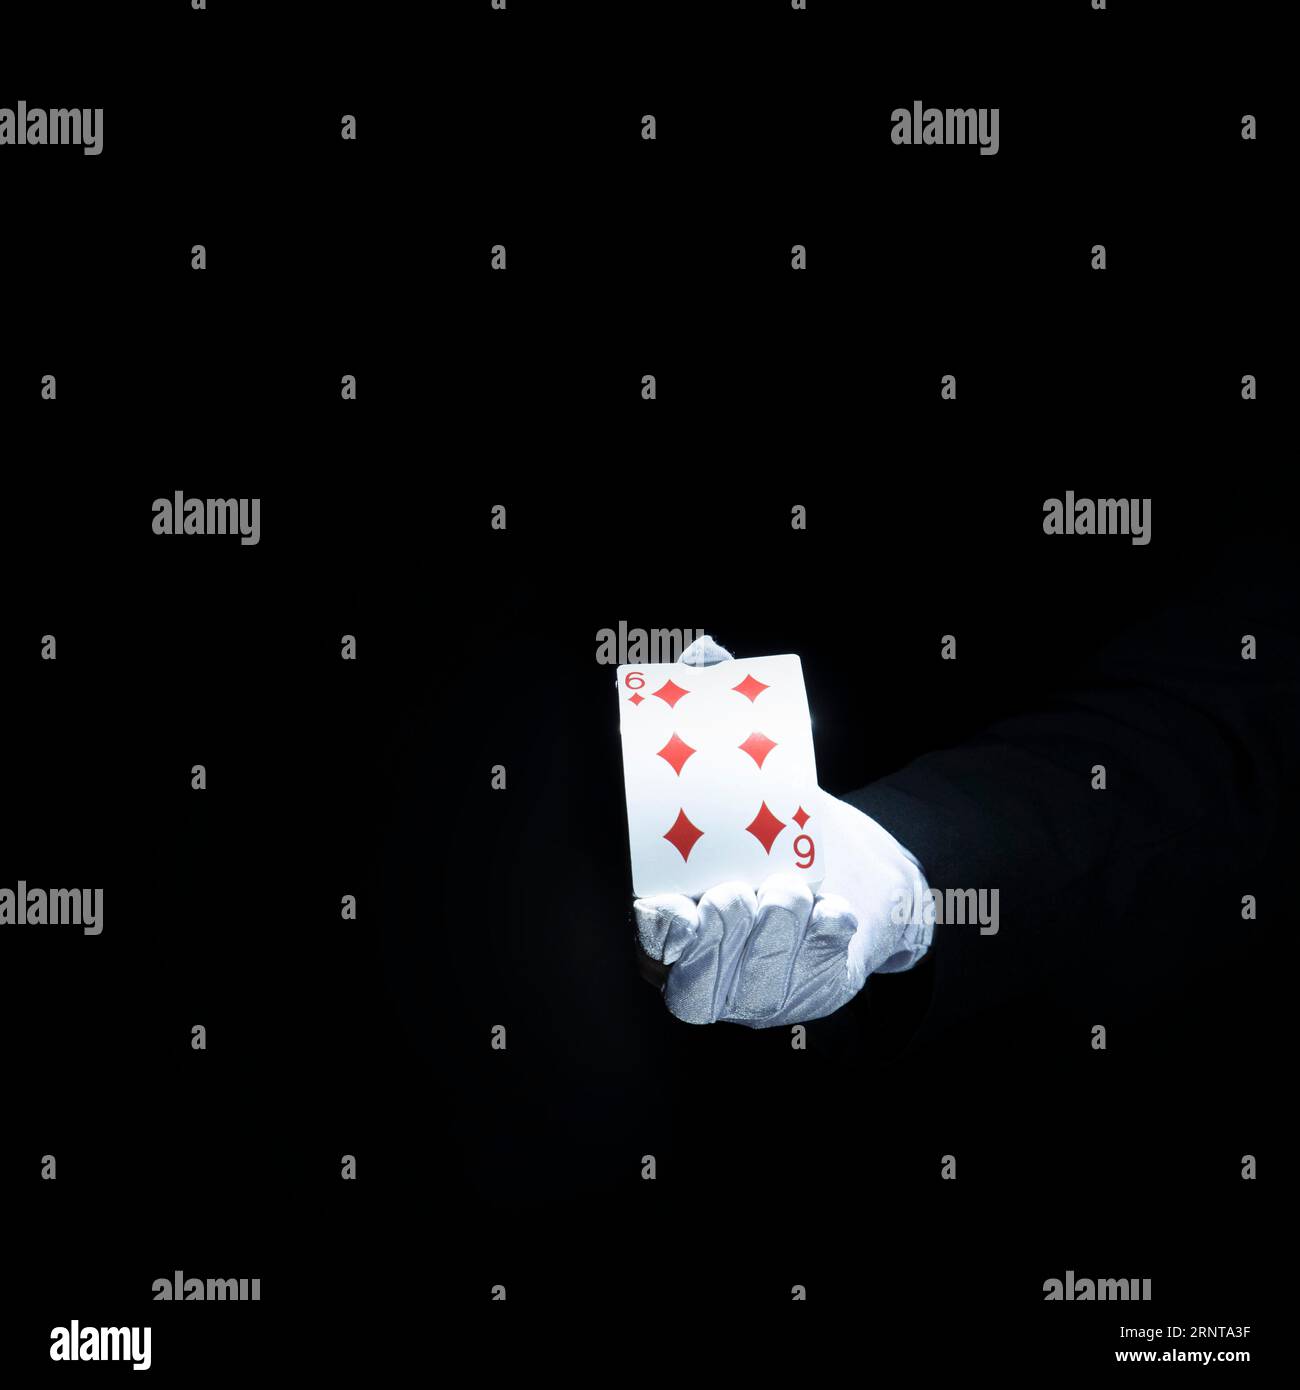 Magician s hand showing diamond playing card against black background Stock Photo